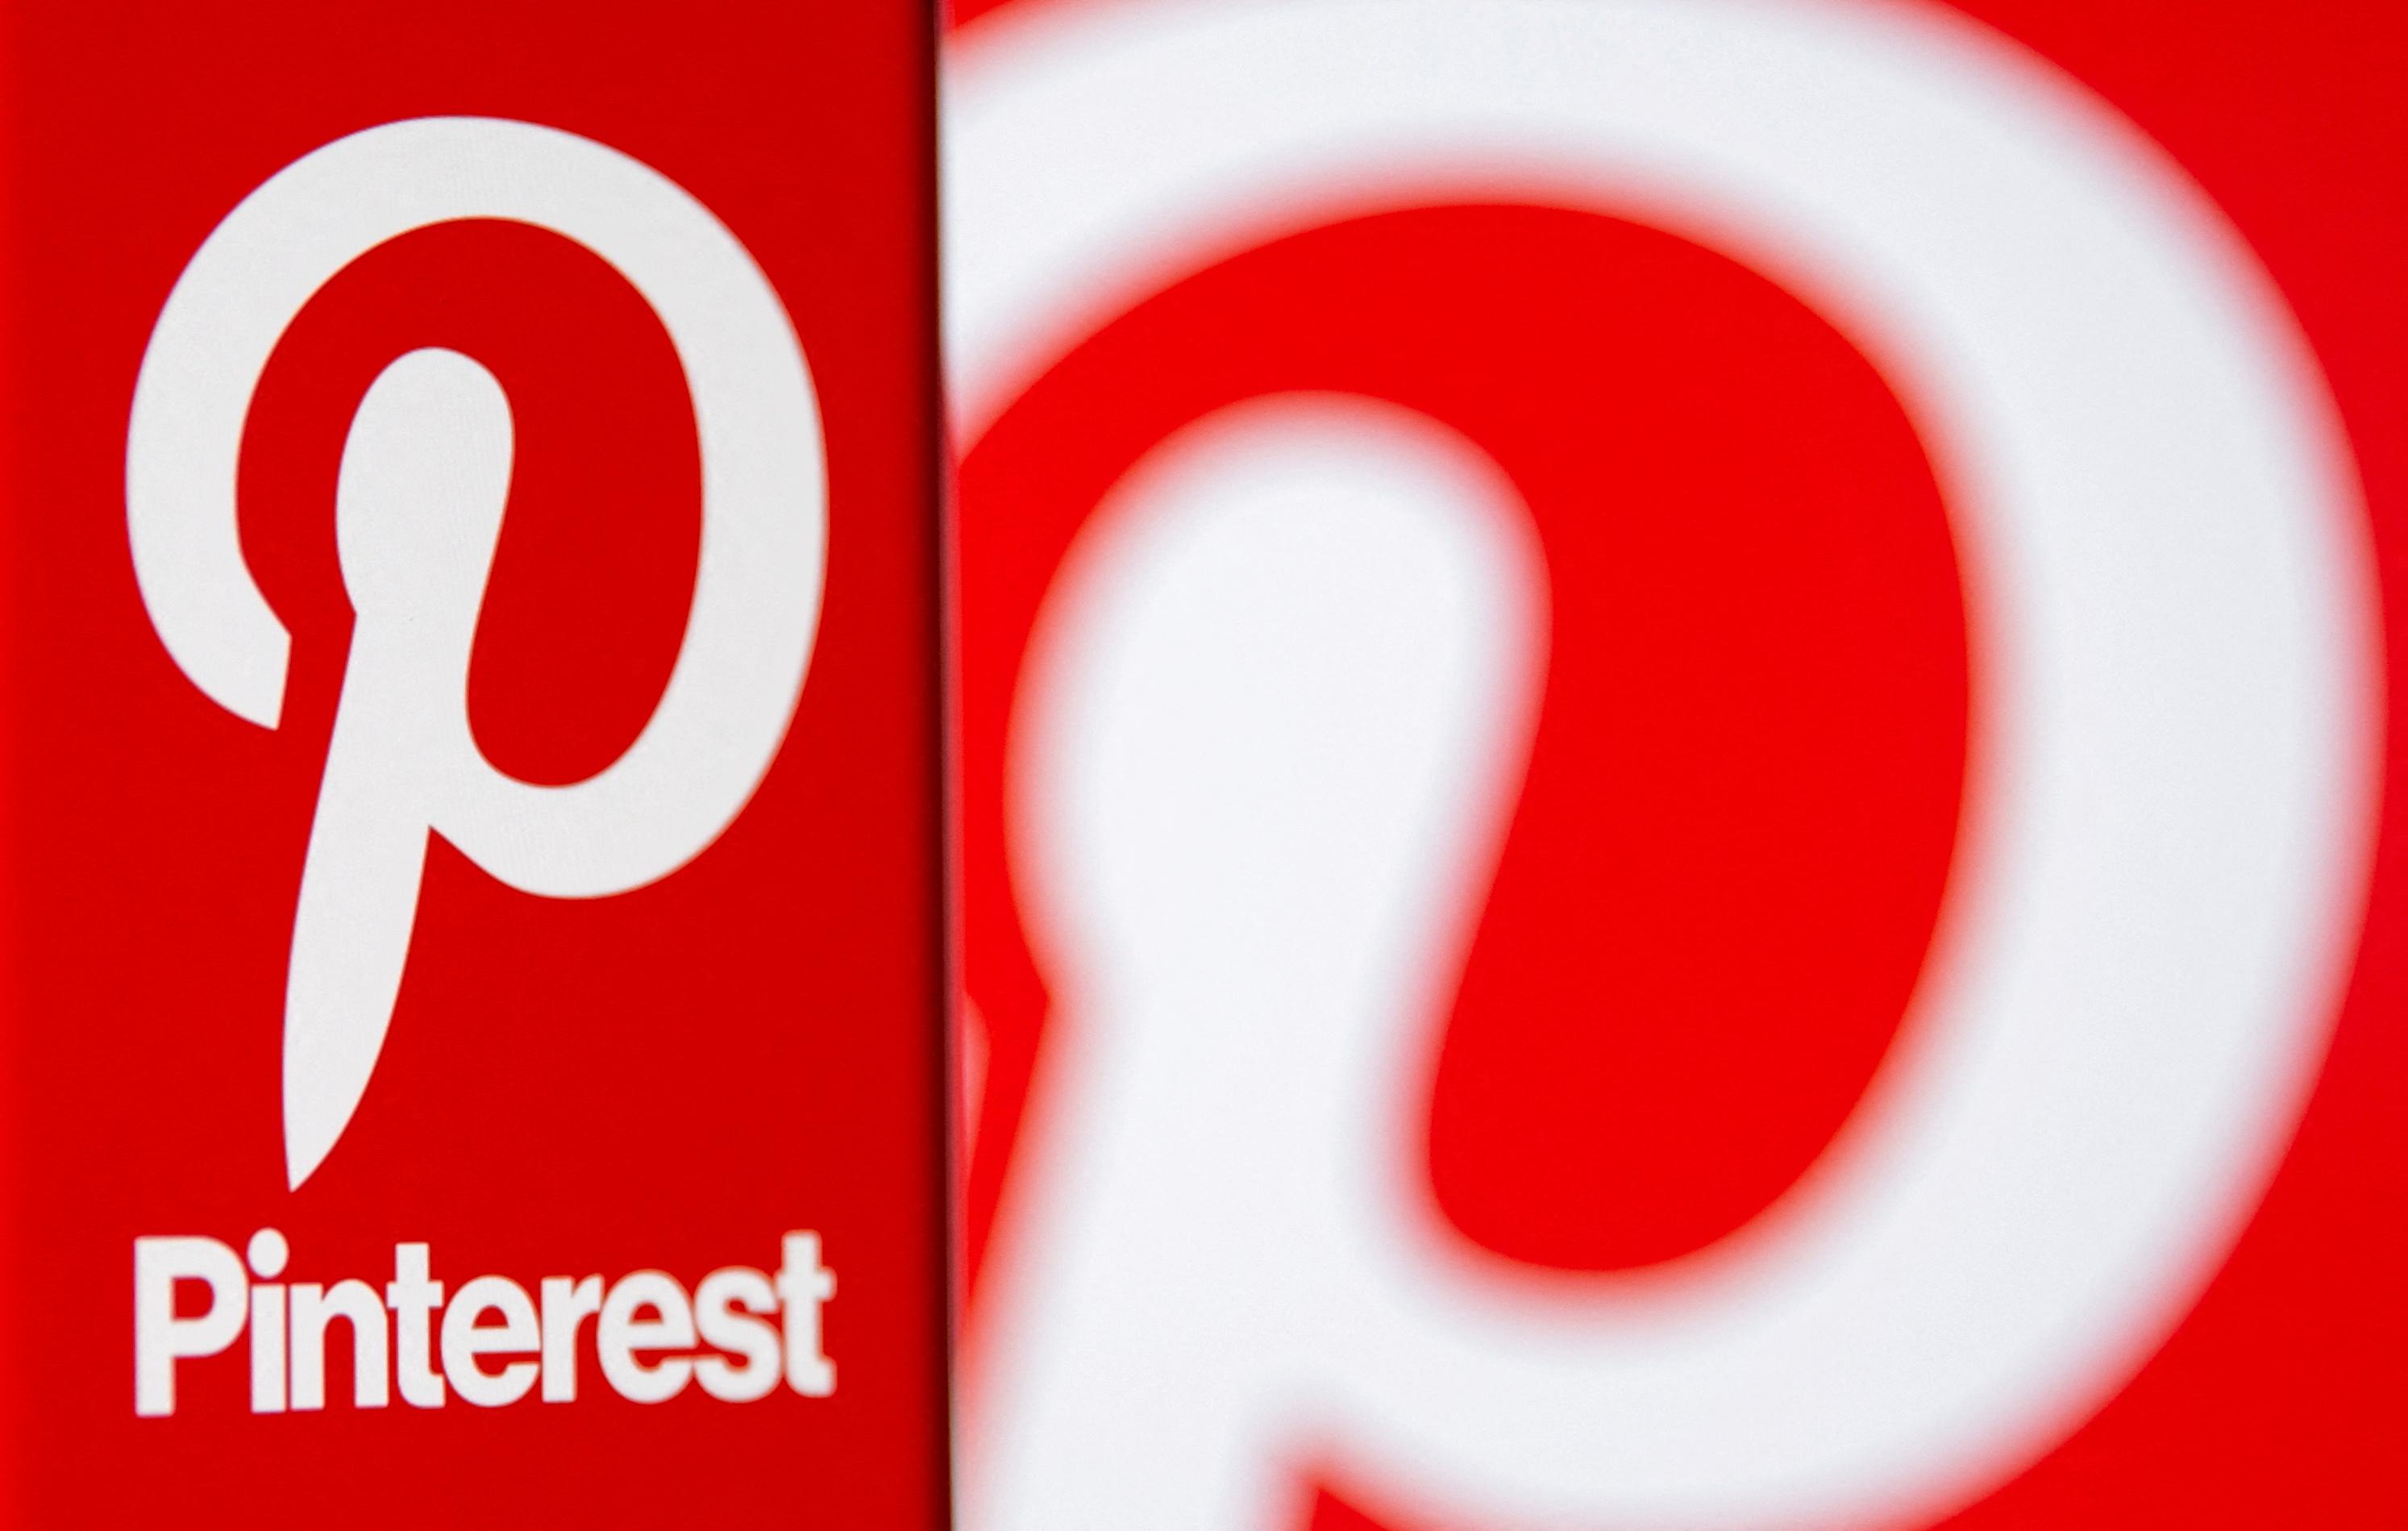 Pinterest results dazzle Wall St as ad business booms | Reuters